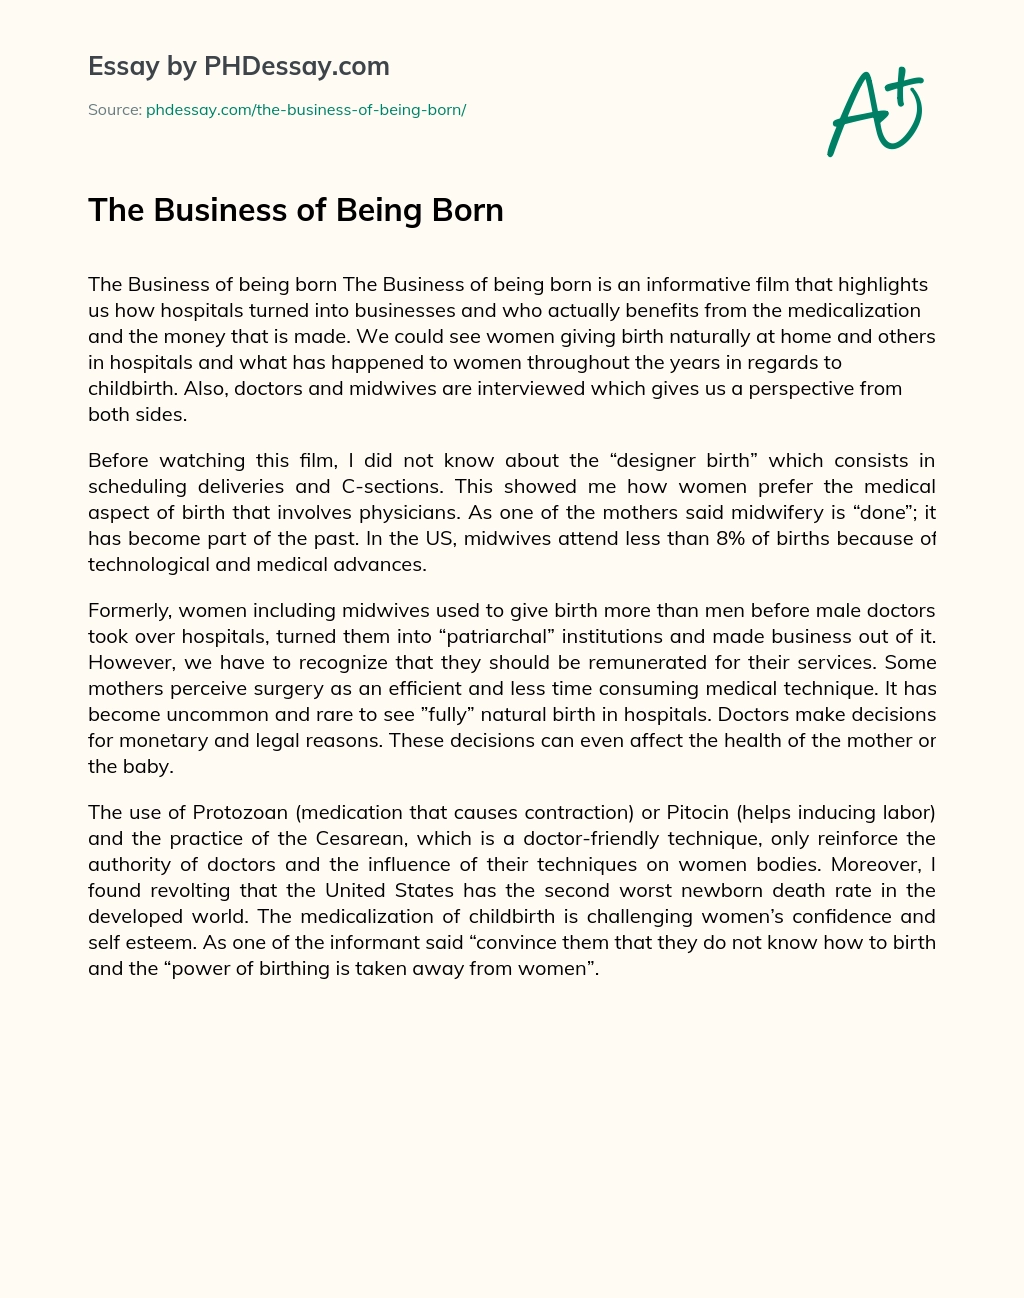 The Business of Being Born essay